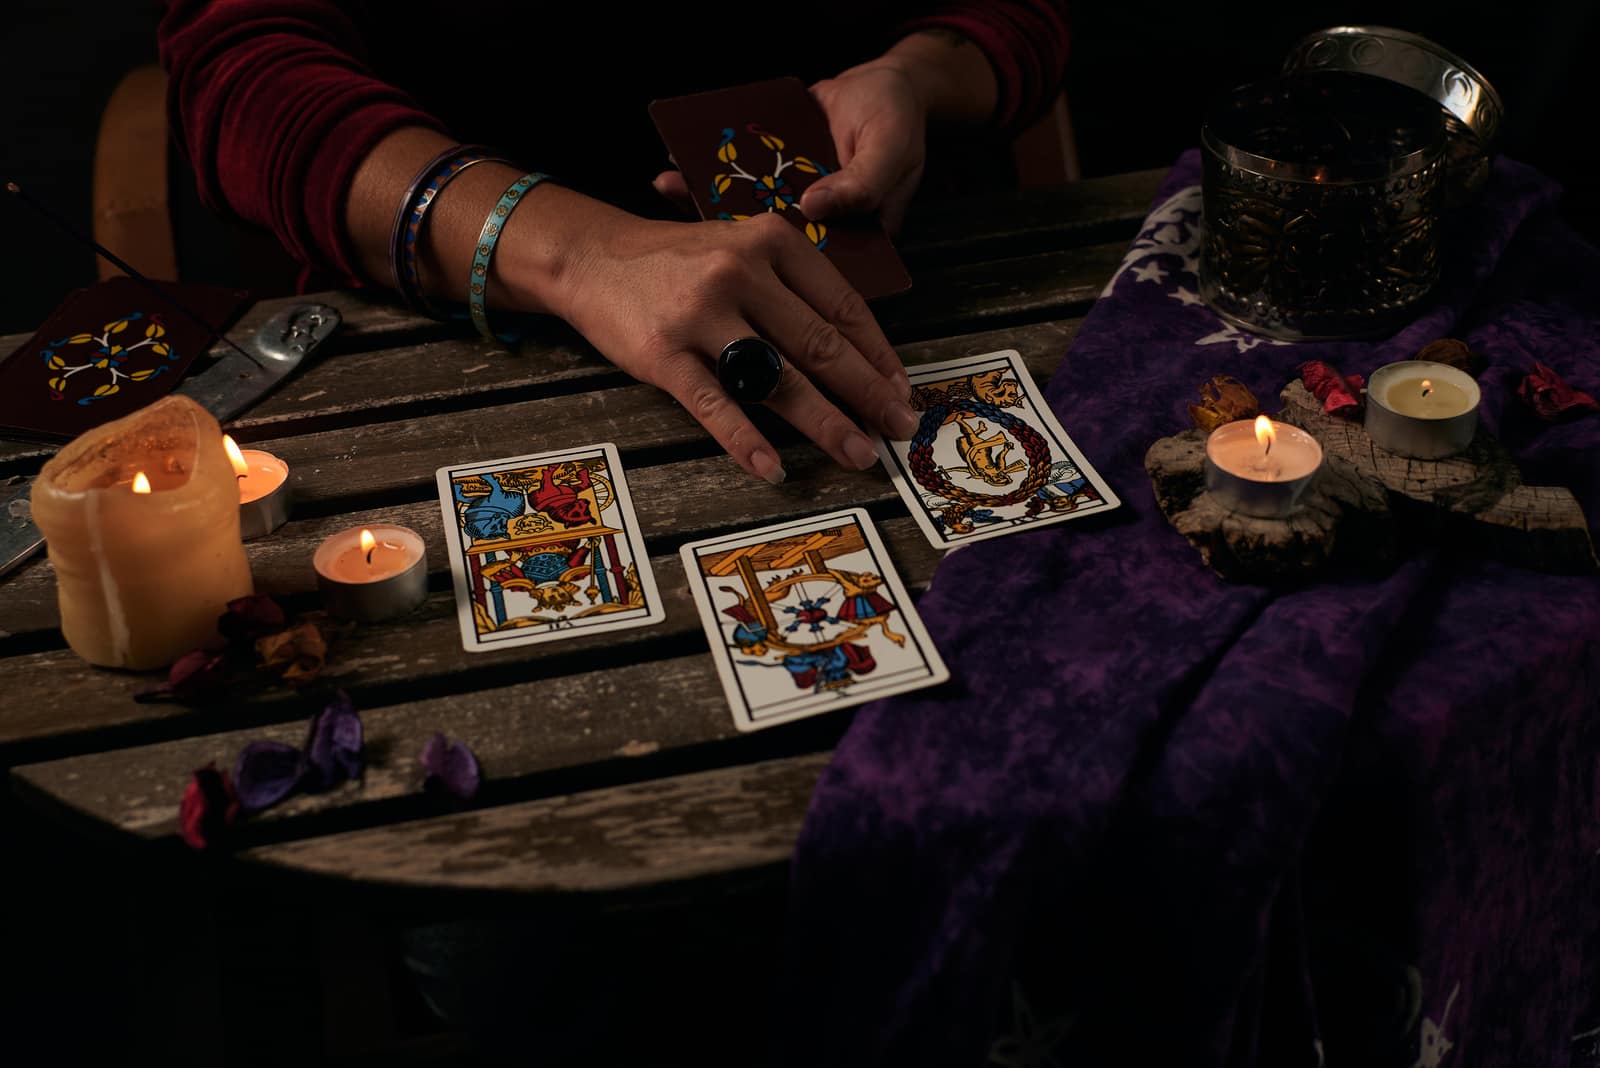 woman reads tarot cards on a table with candles